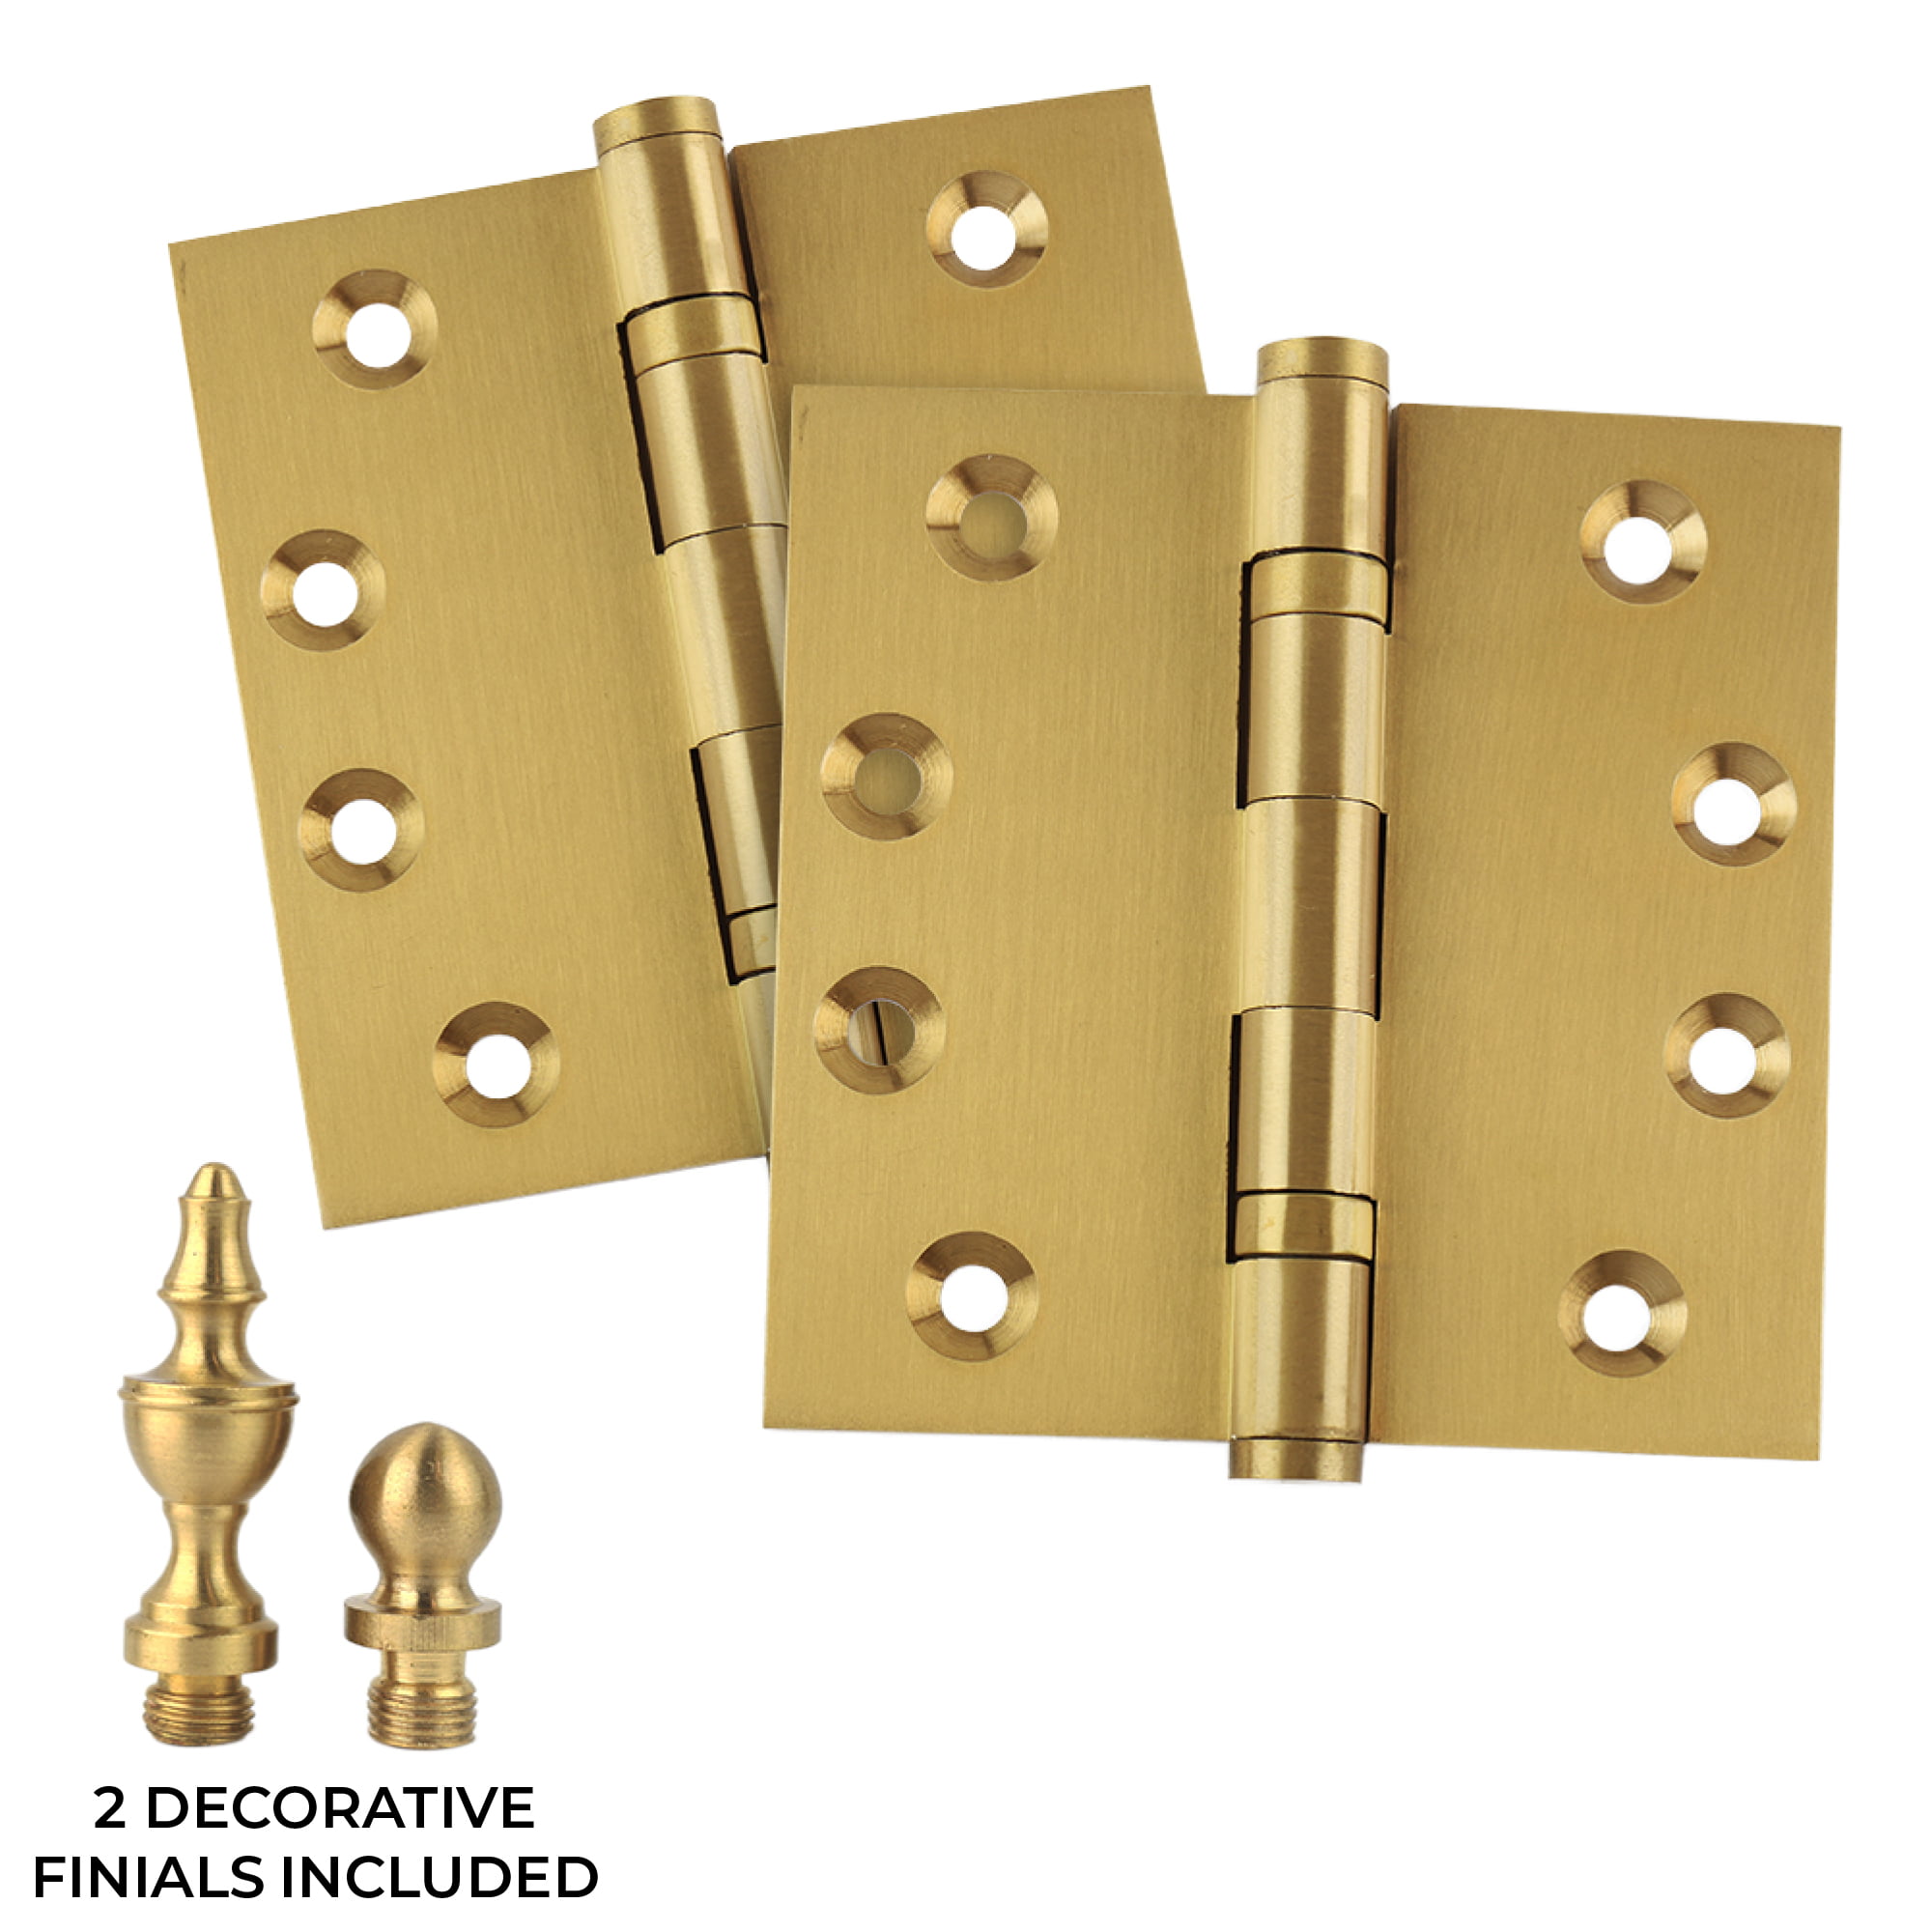 Ball/Urn/Button Tips Included US15 Set of 2 Hinges Door Hinges 4 x 4 Extruded Solid Brass Ball Bearing Brass Hinge Heavy Duty Satin Nickel Architectural Grade Stainless Steel Removable Pin 